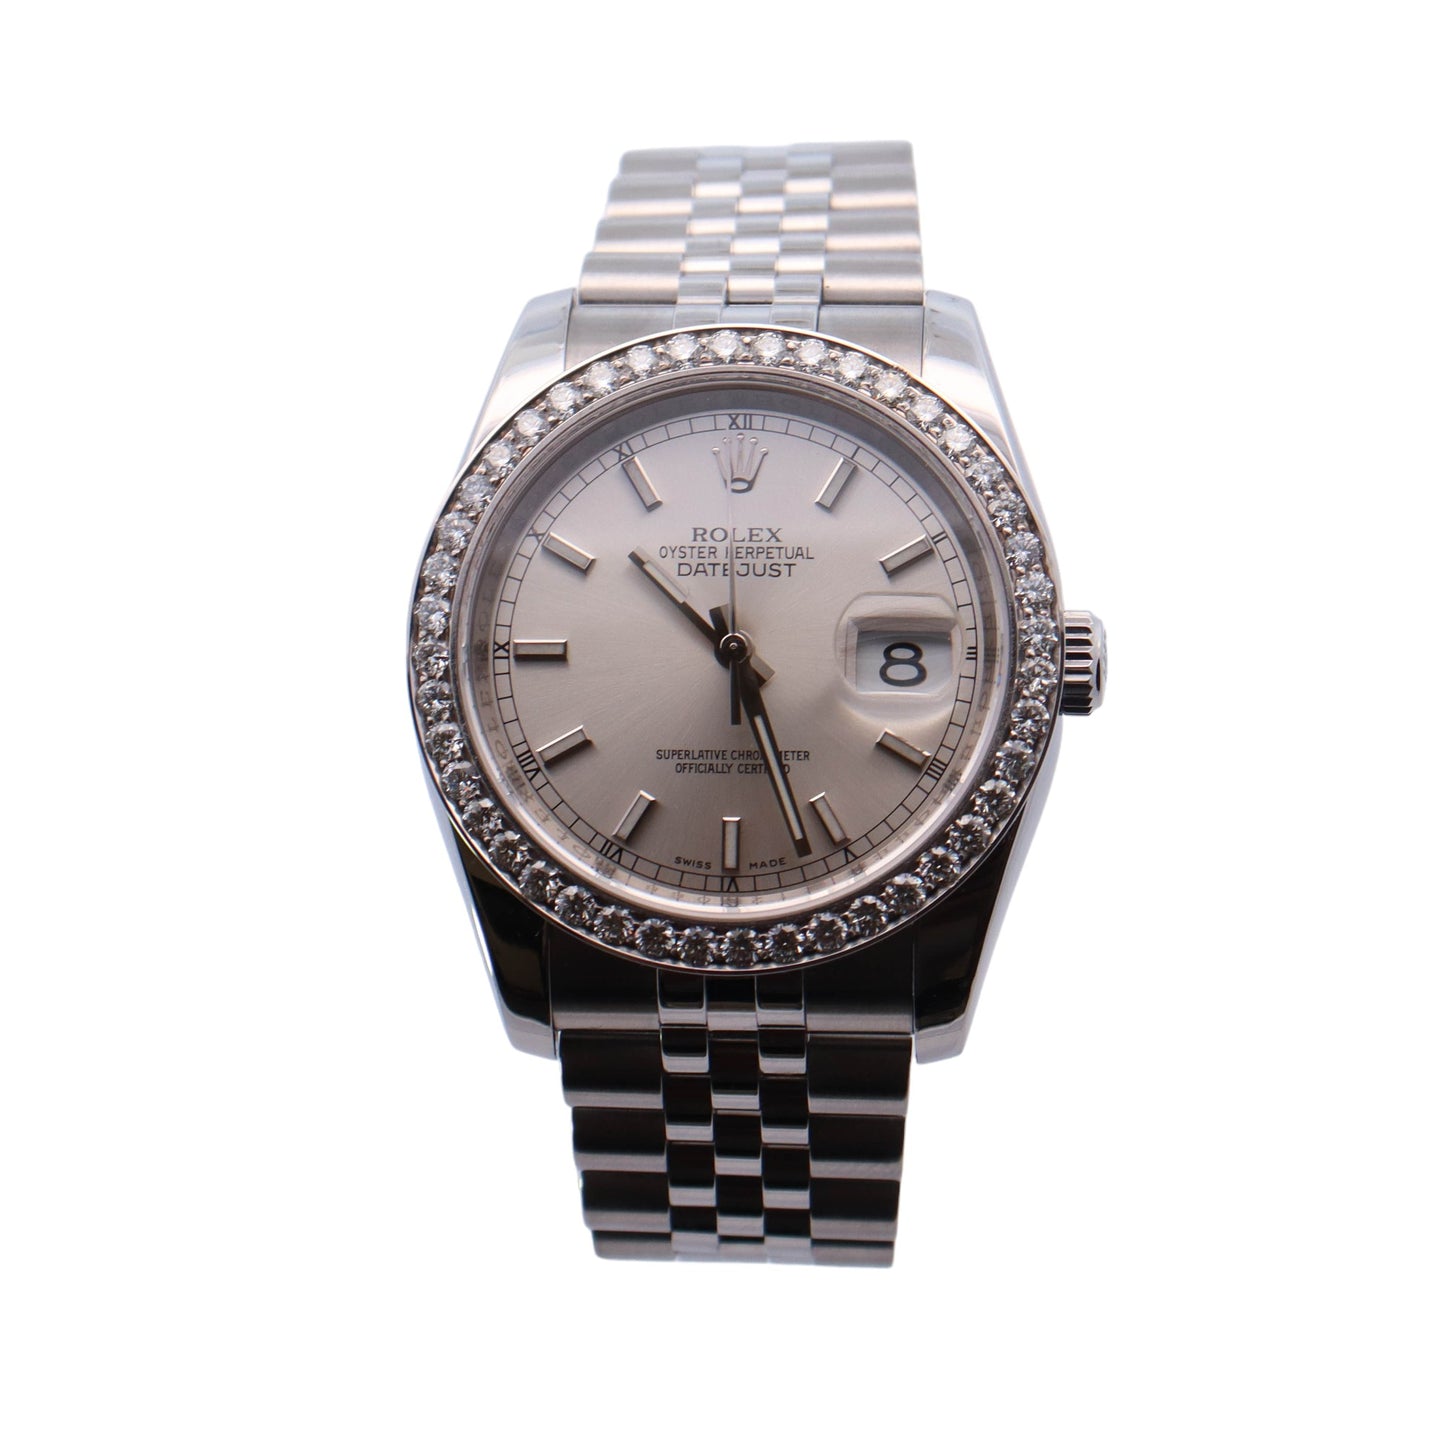 Rolex Datejust Stainless Steel 36mm Silver Stick Dial Watch  Reference #: 116234